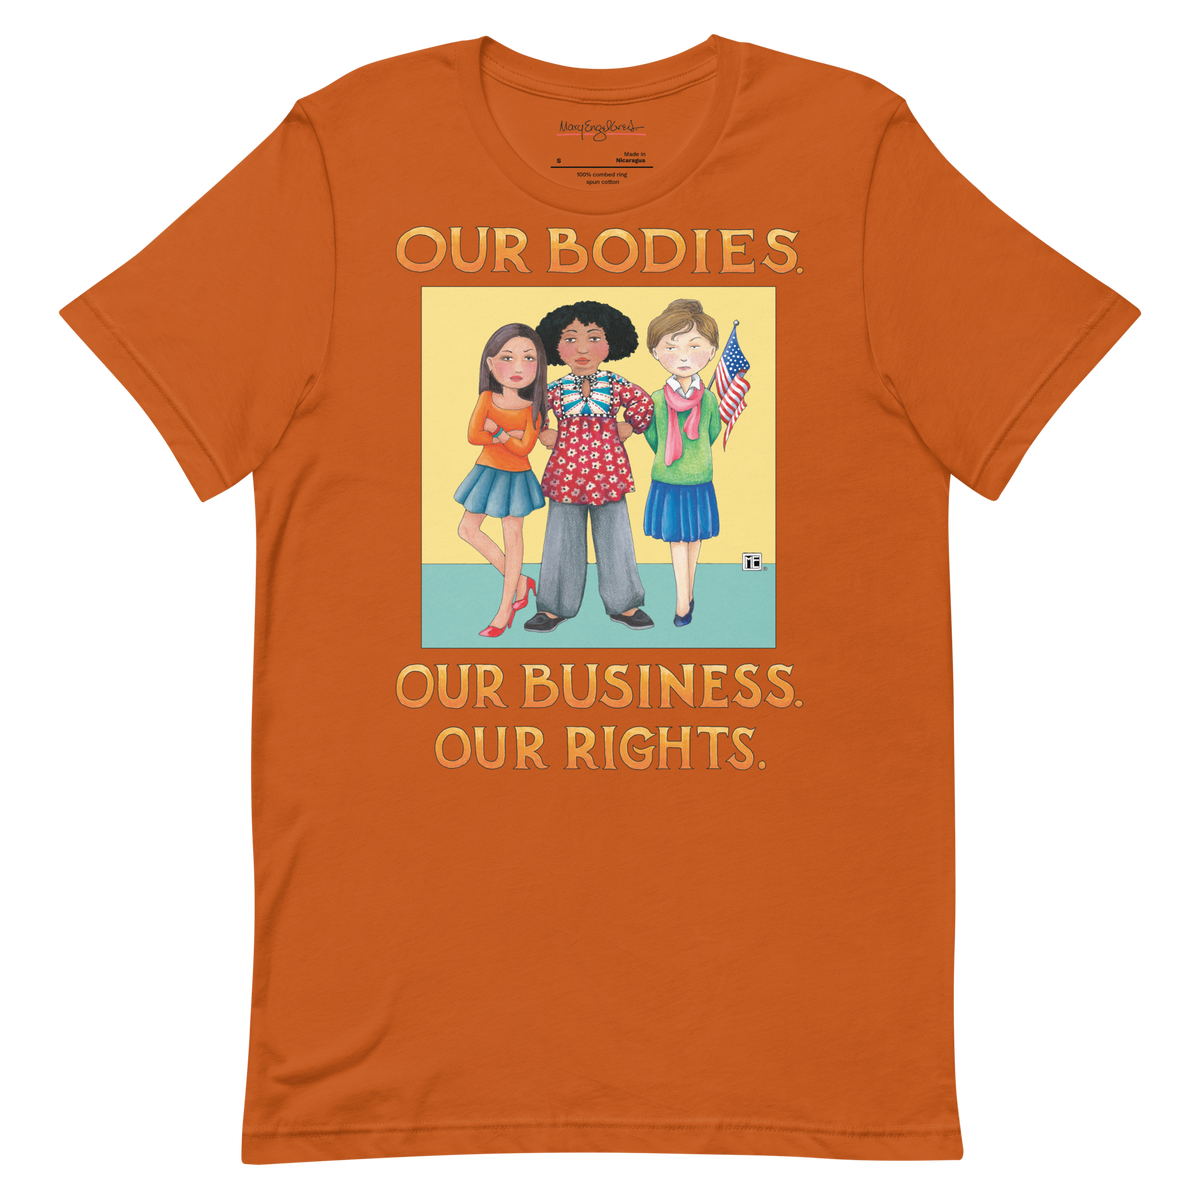 Our Rights Unisex T-Shirt